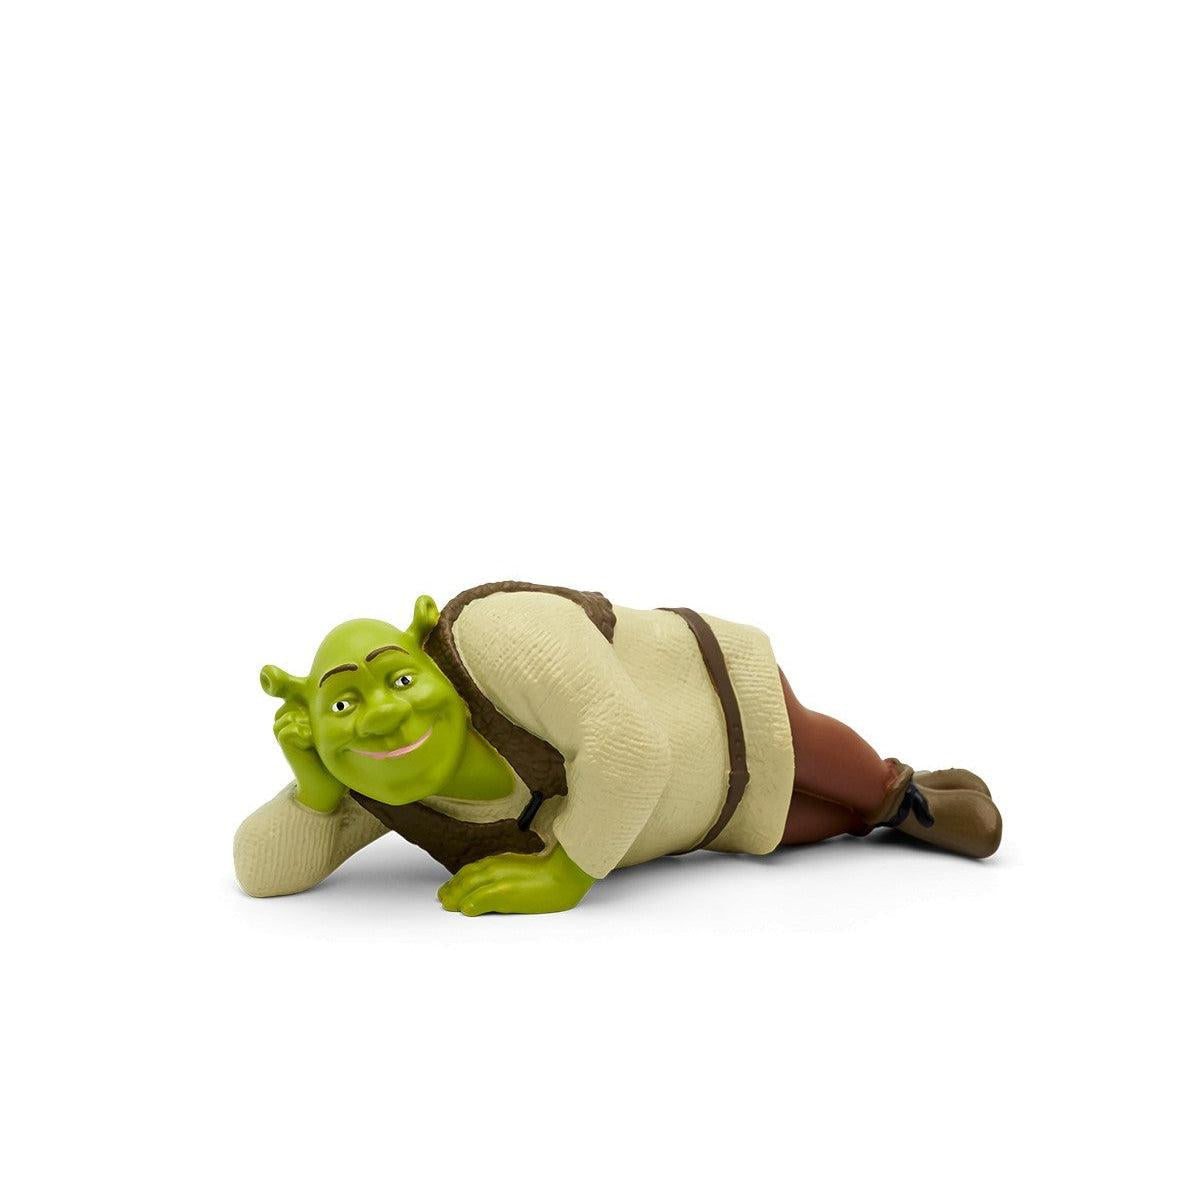 Tonies Shrek - Audio Character for use with Toniebox Player